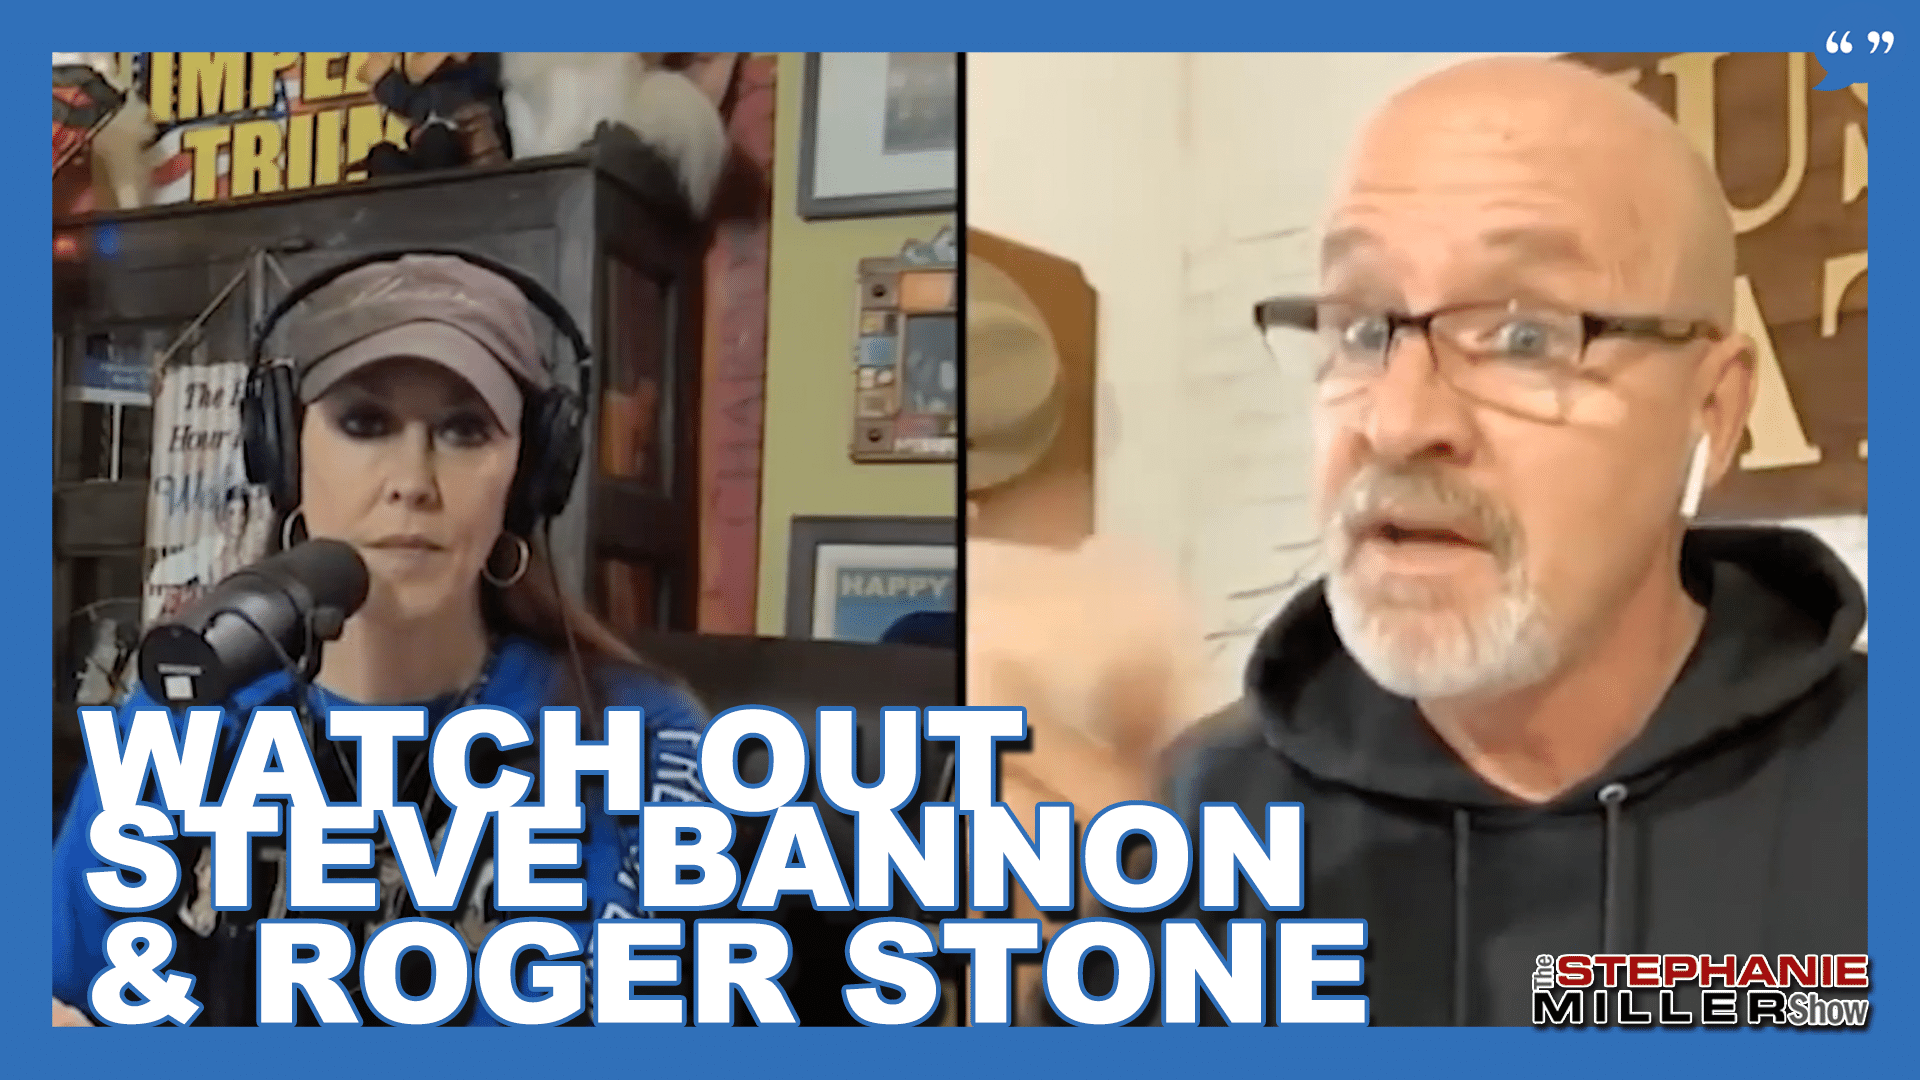 11 Oath Keepers Charged with Seditious Conspiracy, Are Bannon & Stone Next?